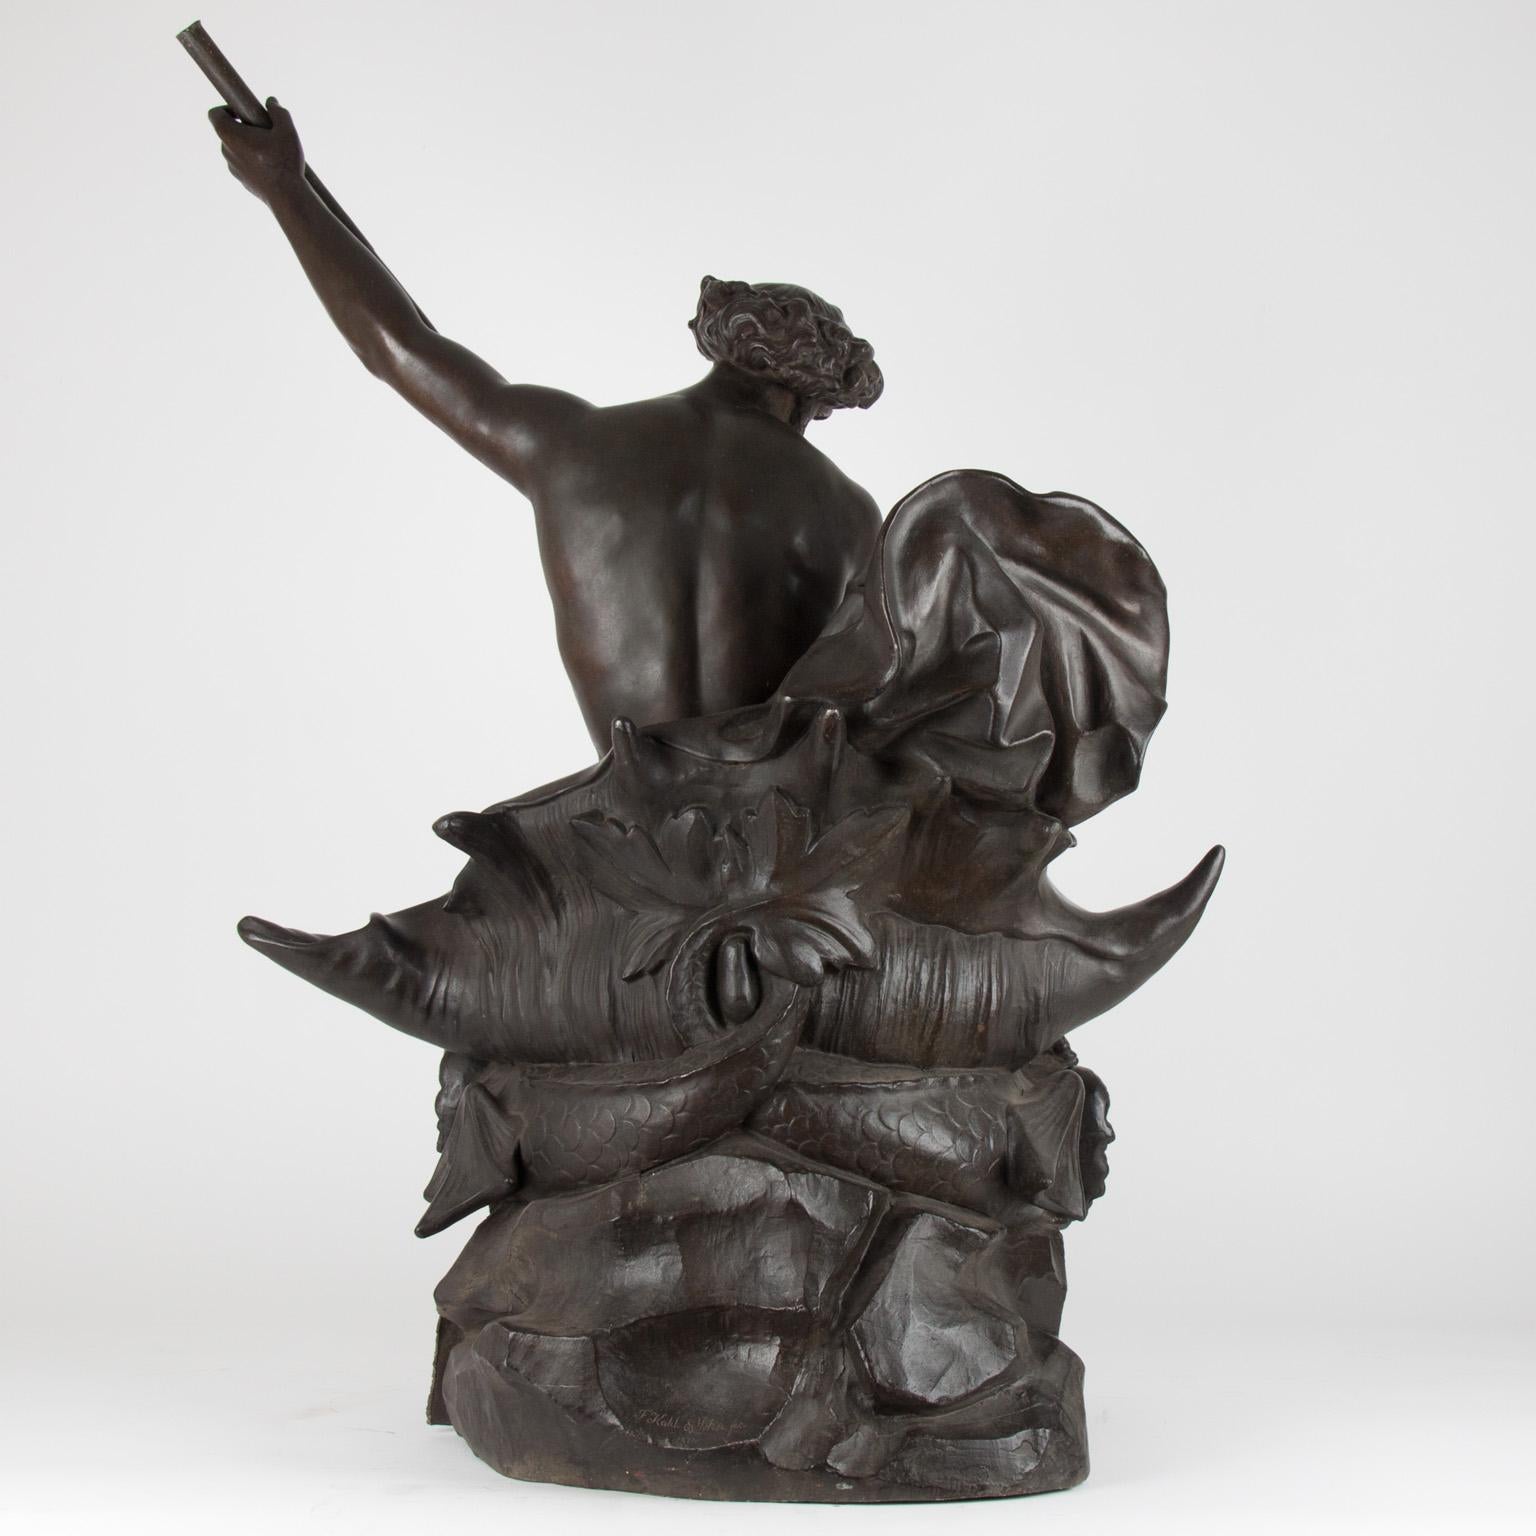 Large 19th century Zamac statue depicting Neptune sitting on two dolphins,
depicting Neptune, signed by F.Kahl &Sohn fec.1871.
The statue is made of Zamac with a beautiful bronze patina.
   